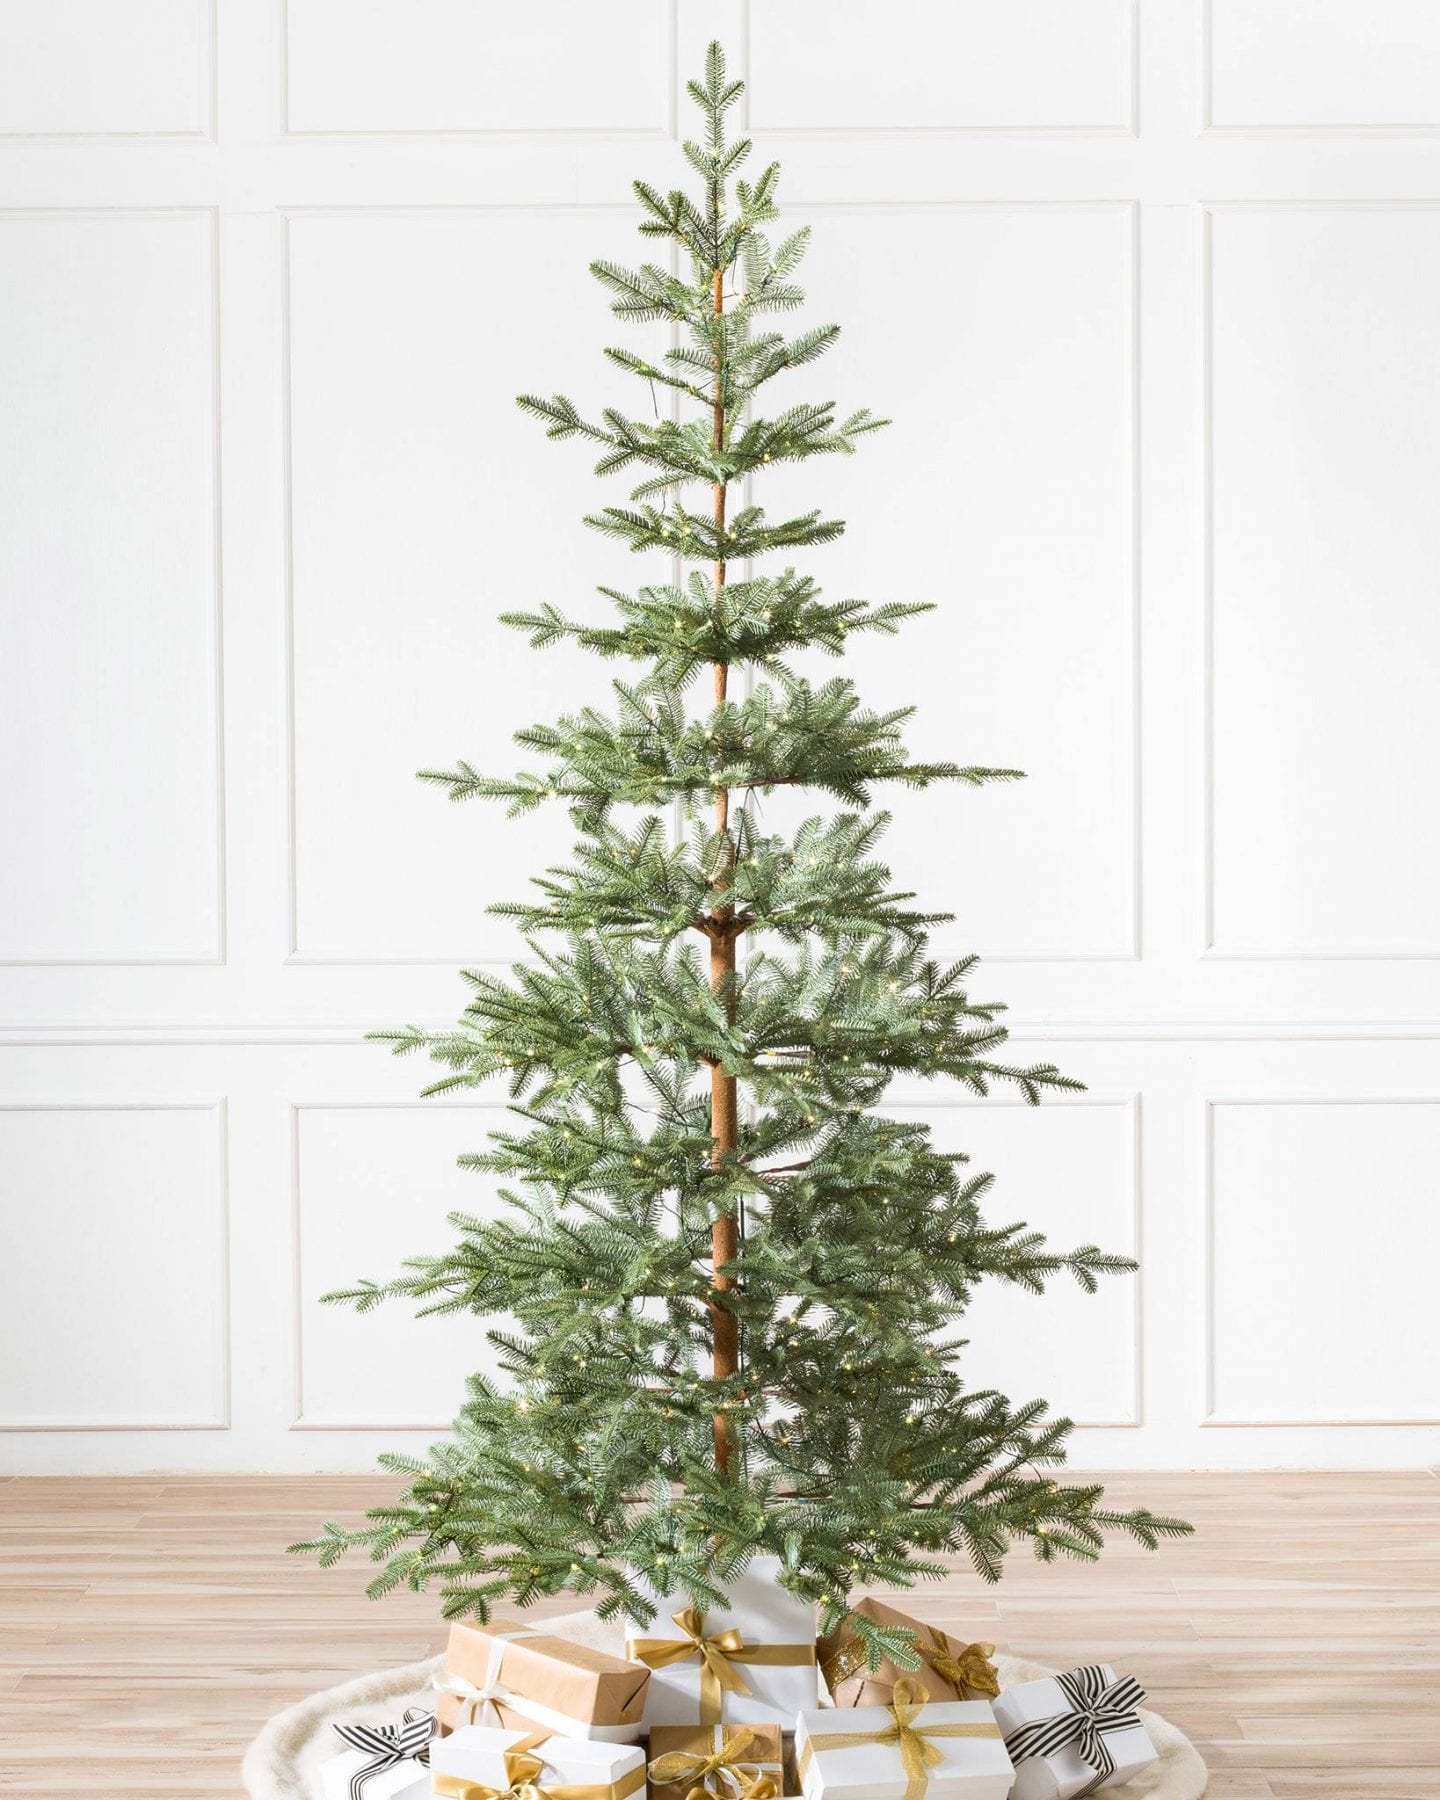 10 MINIMALIST CHRISTMAS DECOR IDEAS featured by top US life and style blog, Just Add Glam.